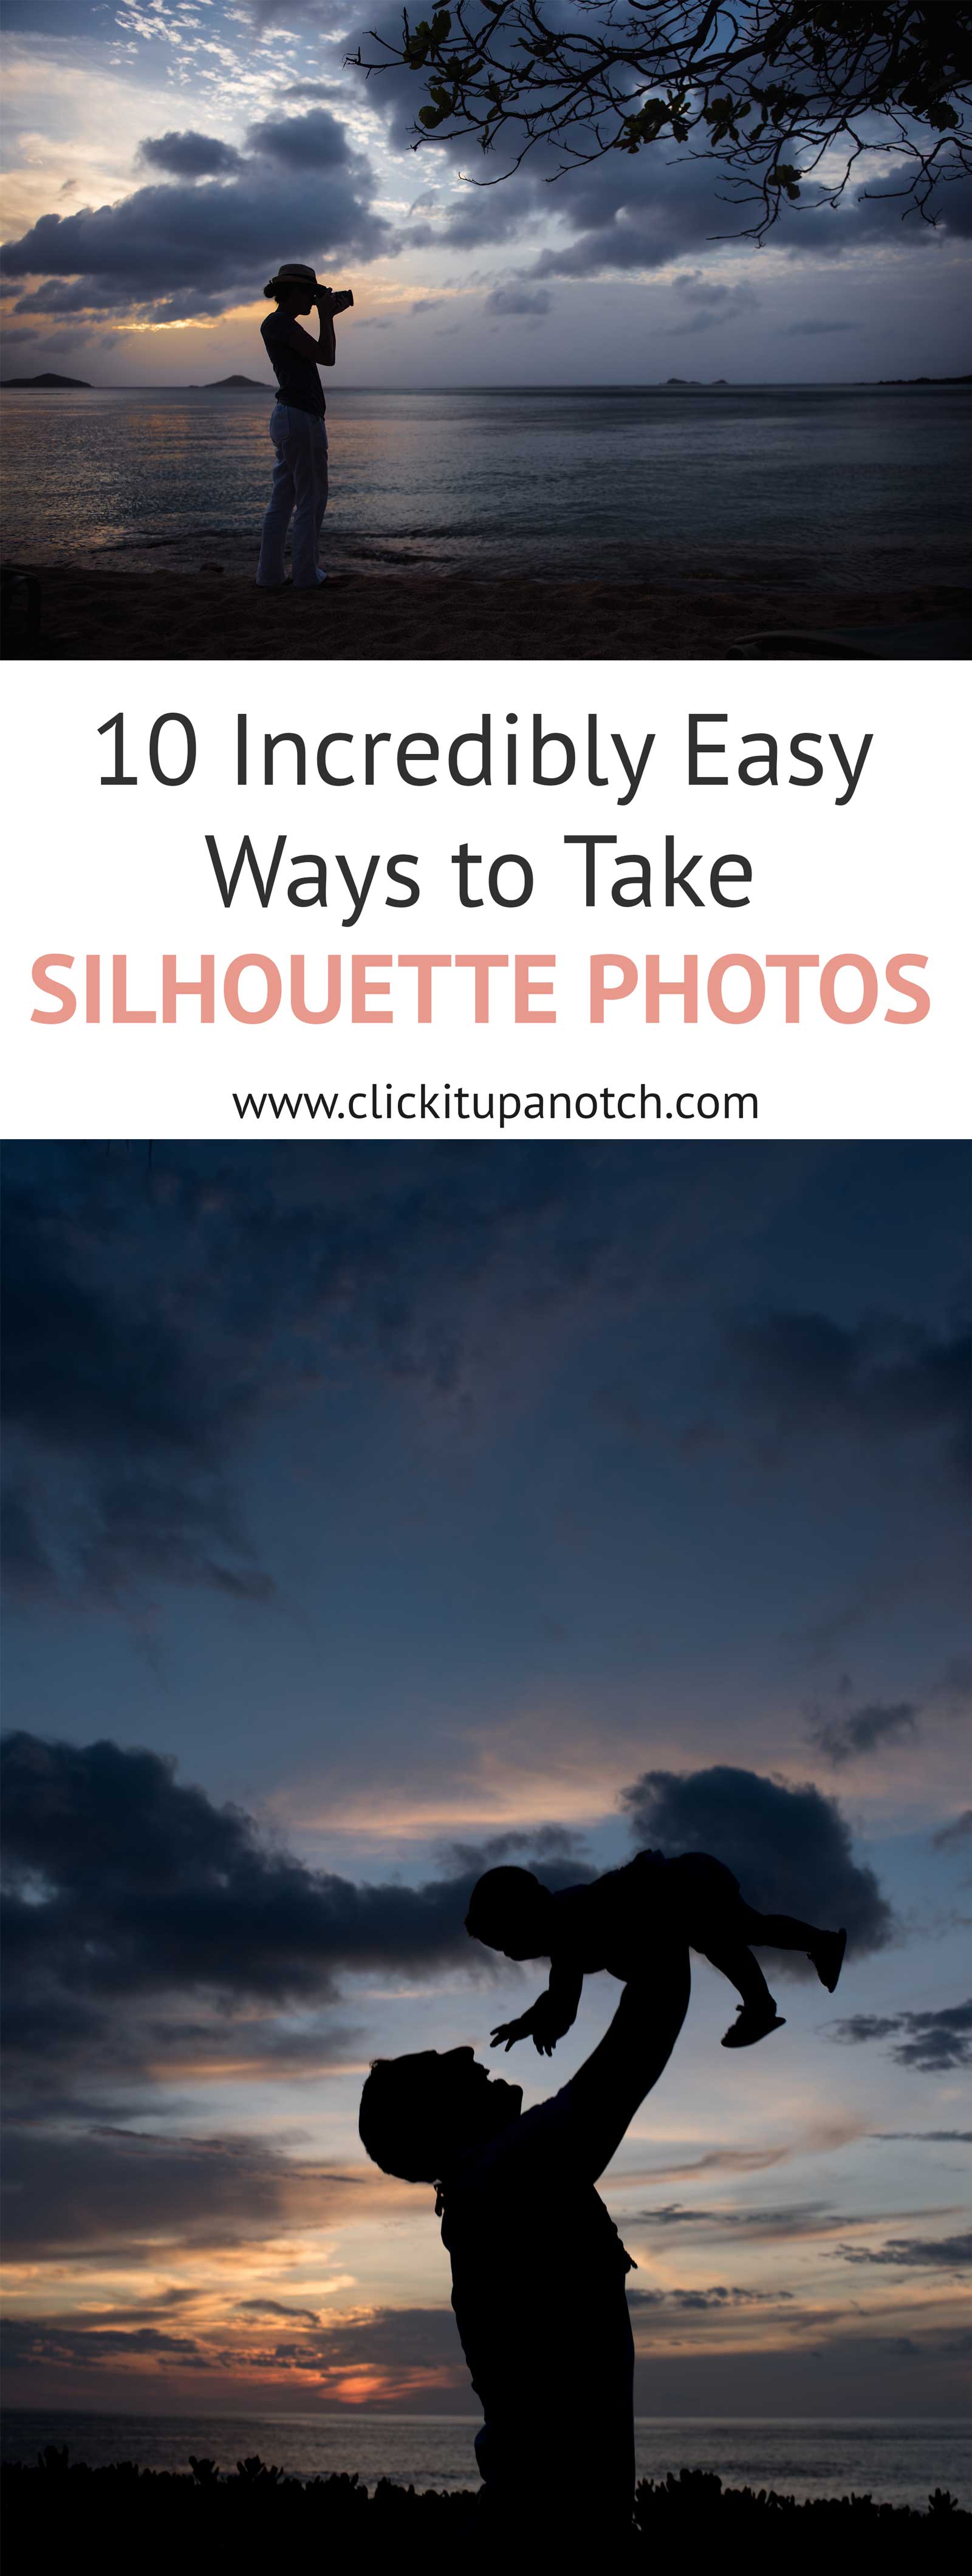 No kidding! Such easy tips for capturing amazing silhouette photos. Love the photography tips from this website!